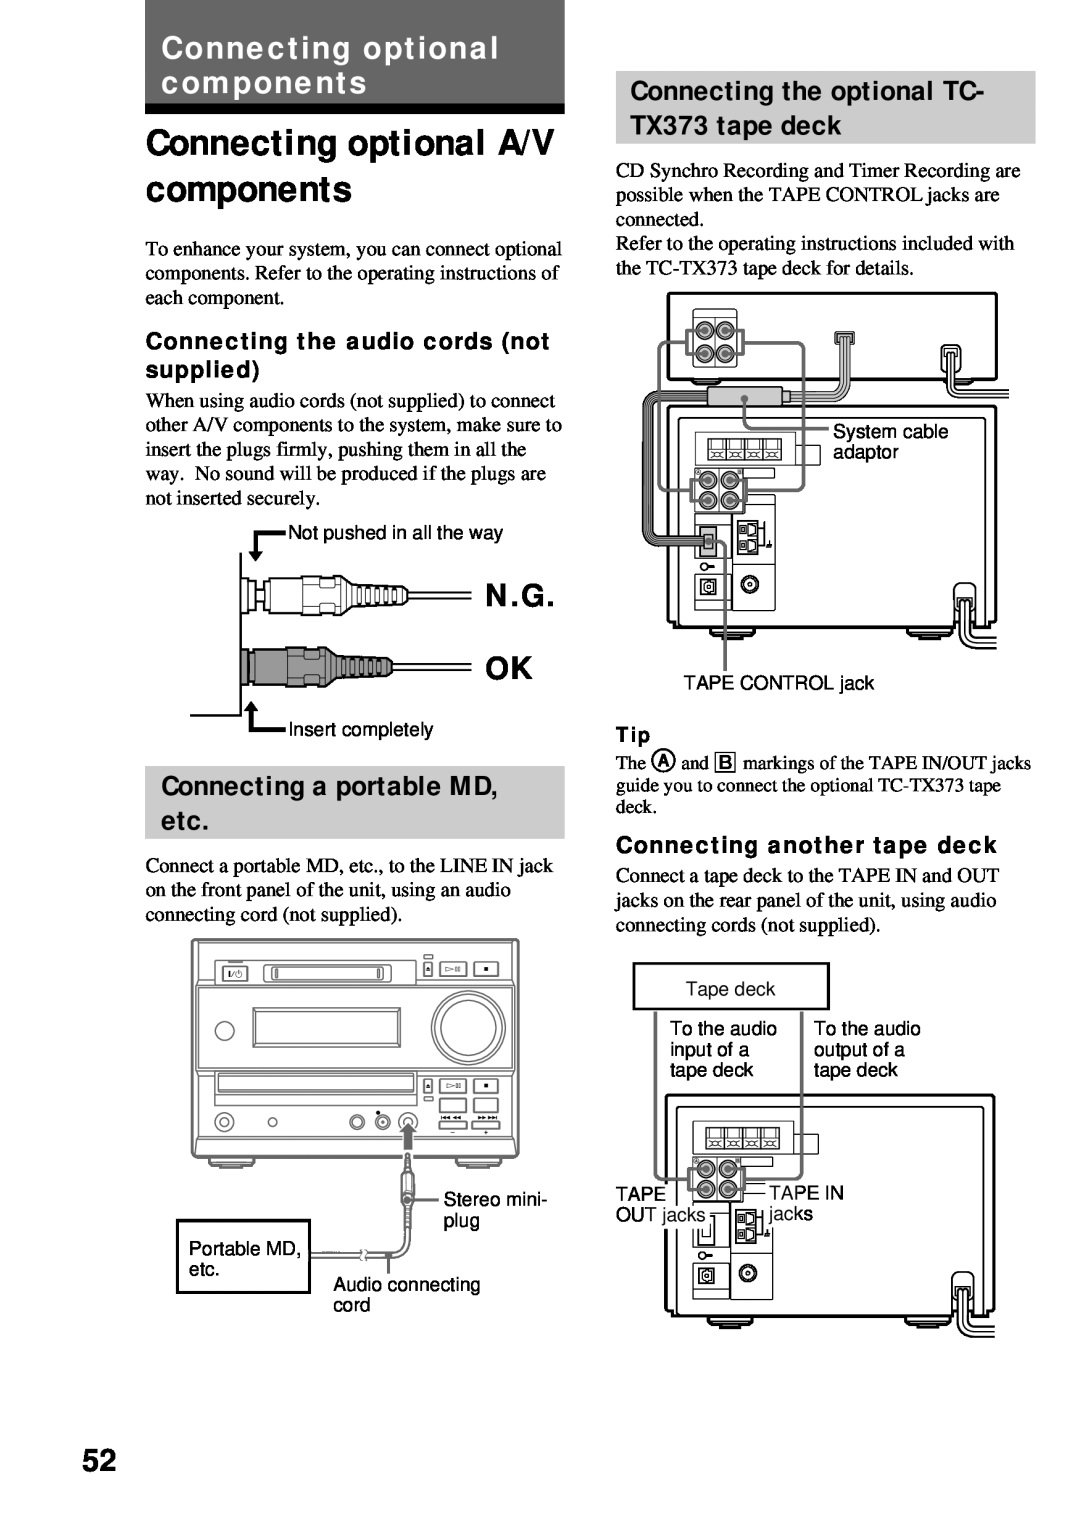 Sony DHC-MD373 Connecting optional A/V components, Connecting optional components, N.G Ok, Connecting a portable MD etc 